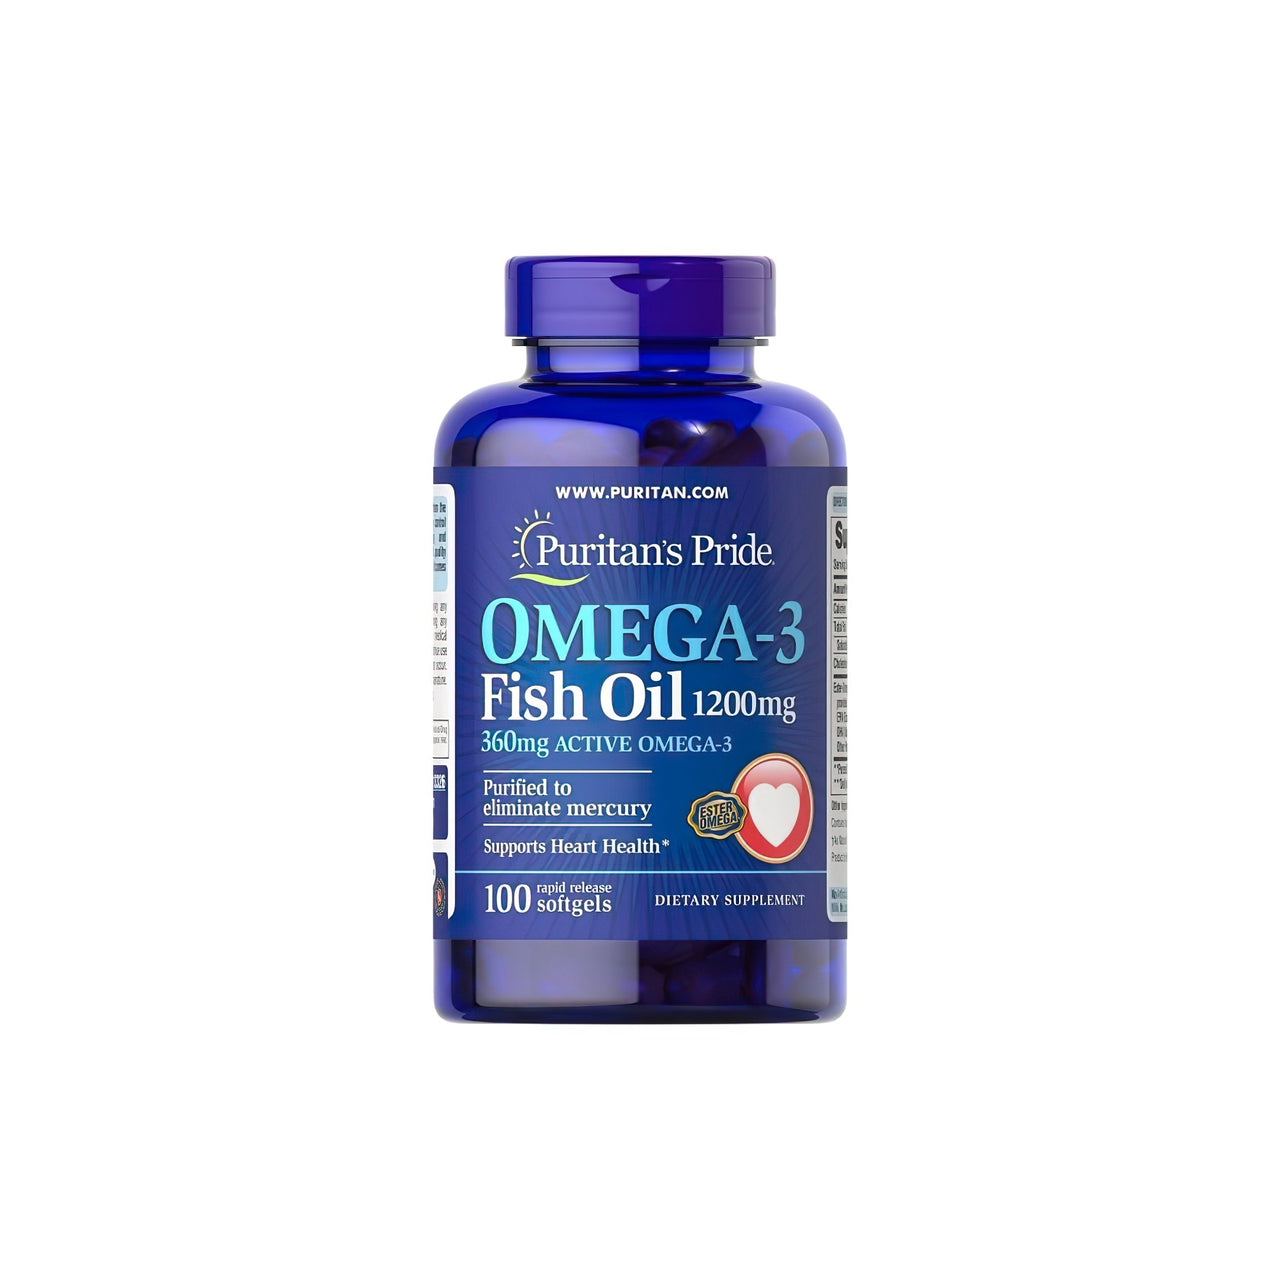 An Omega-3 Fish Oil 1200 mg (360 mg Active Omega-3) 100 softgel supplement by Puritan's Pride for cardiovascular health and cognitive function.